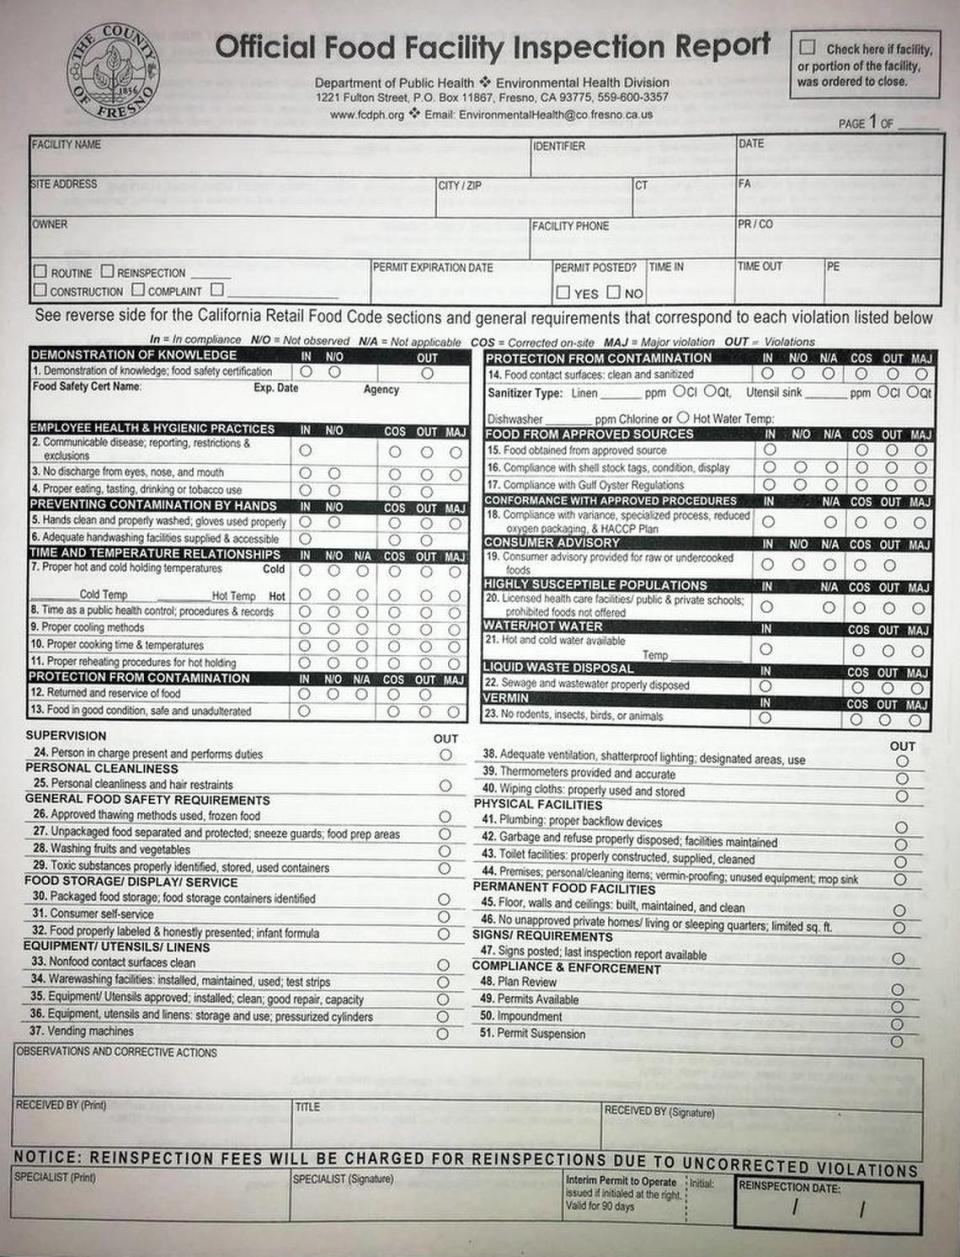 The first page of the form used by Fresno County health inspectors includes a checklist list of more than 50 factors that are checked for compliance with food handling and food safety regulations.